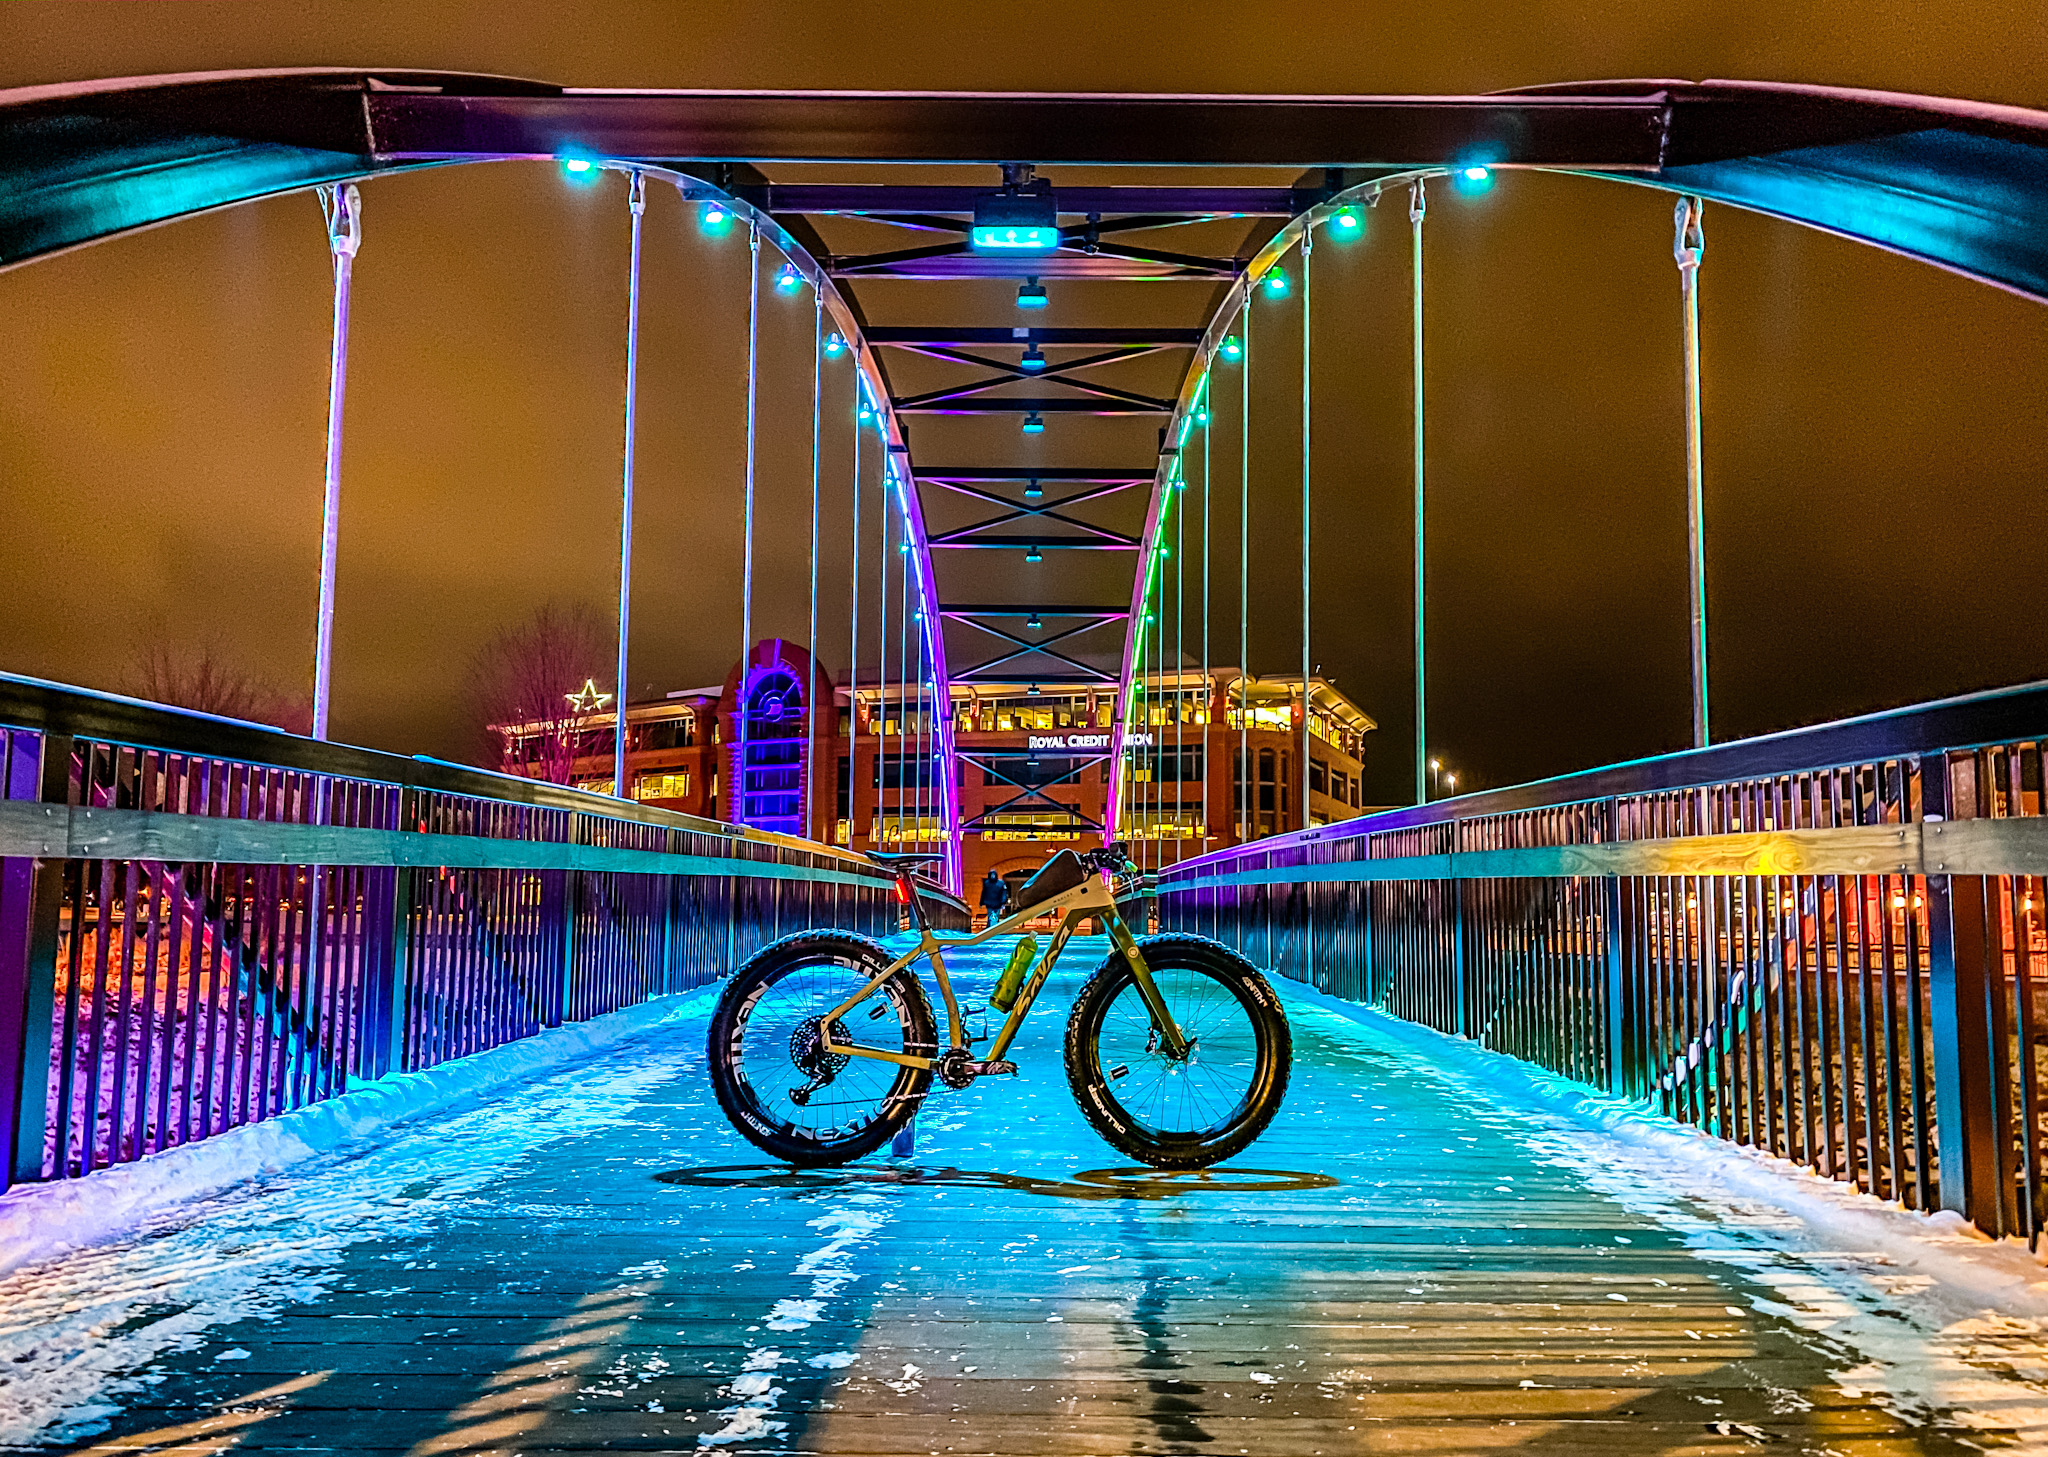 Bikerumor pic of the day Eau Claire, Wisconsin, a bicycle is placed in the center of a walking bridge at night, the lights are turquoise and hot purple and seem to glow on the snow covered bridge.